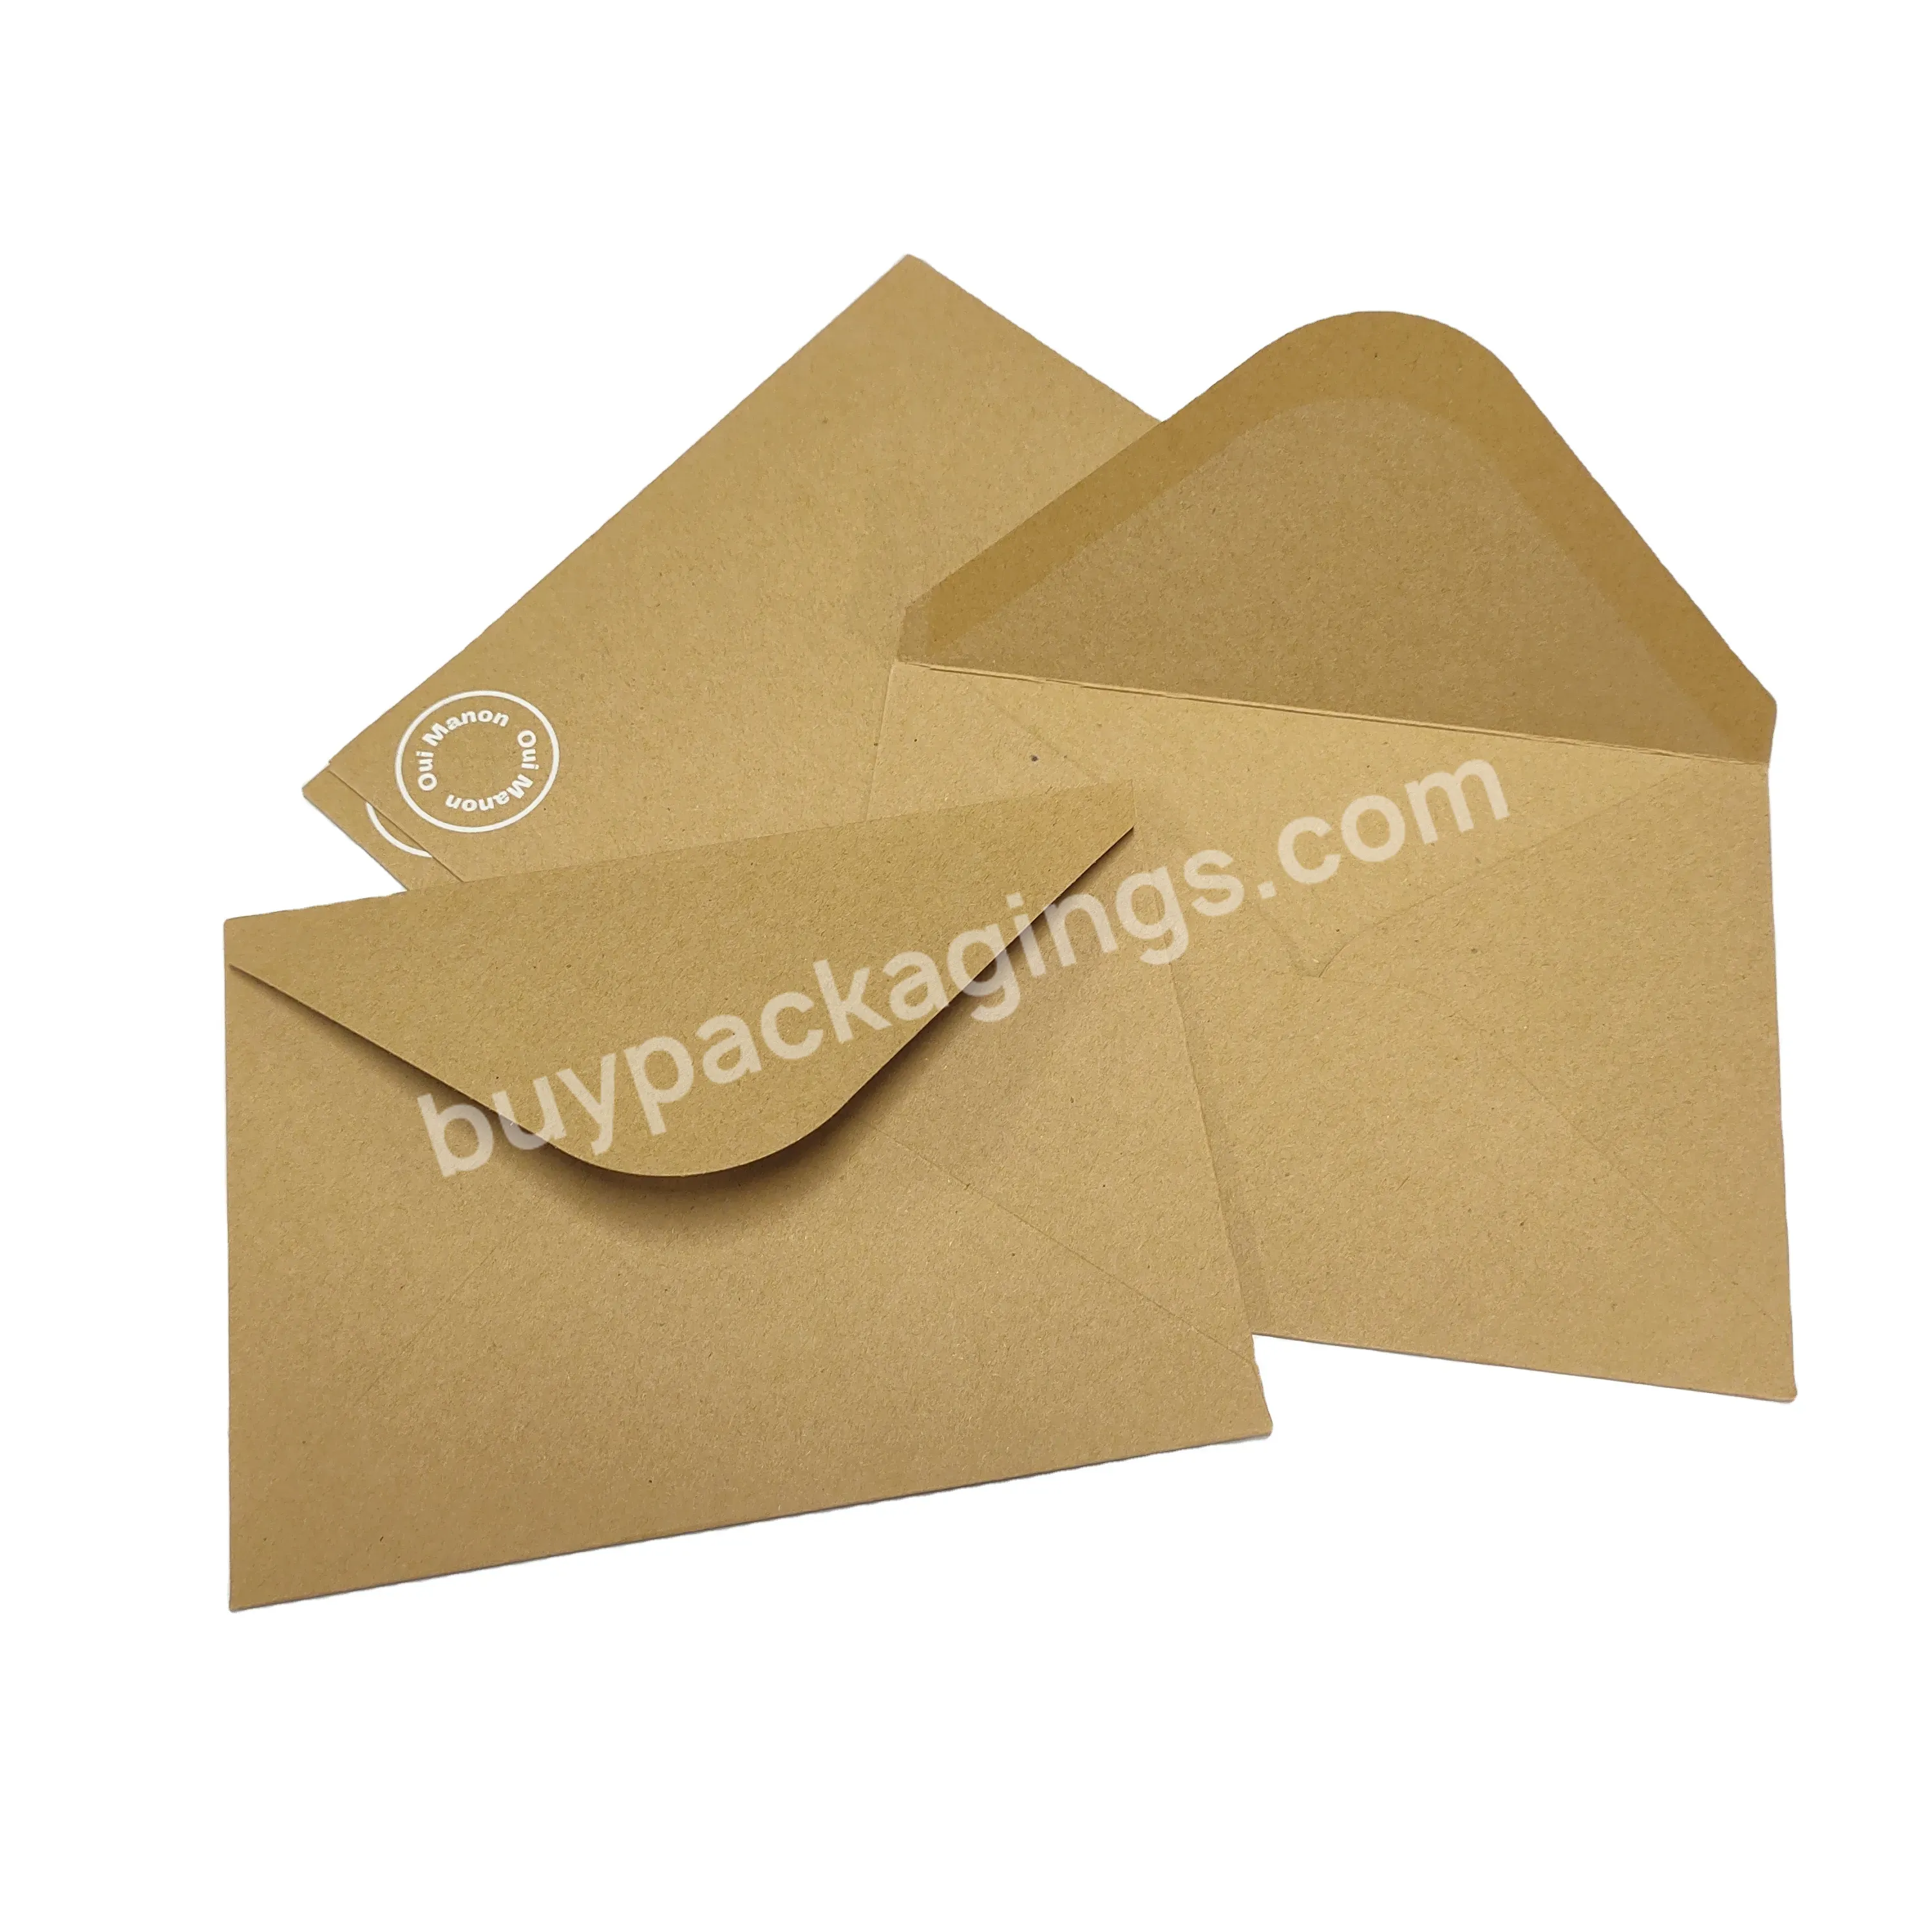 Custom Kraft Paper Envelope With Your Own Logo For Business Or Post - Buy Envelope For Business Or Post,Envelope Custom Logo,Different Size Envelope.